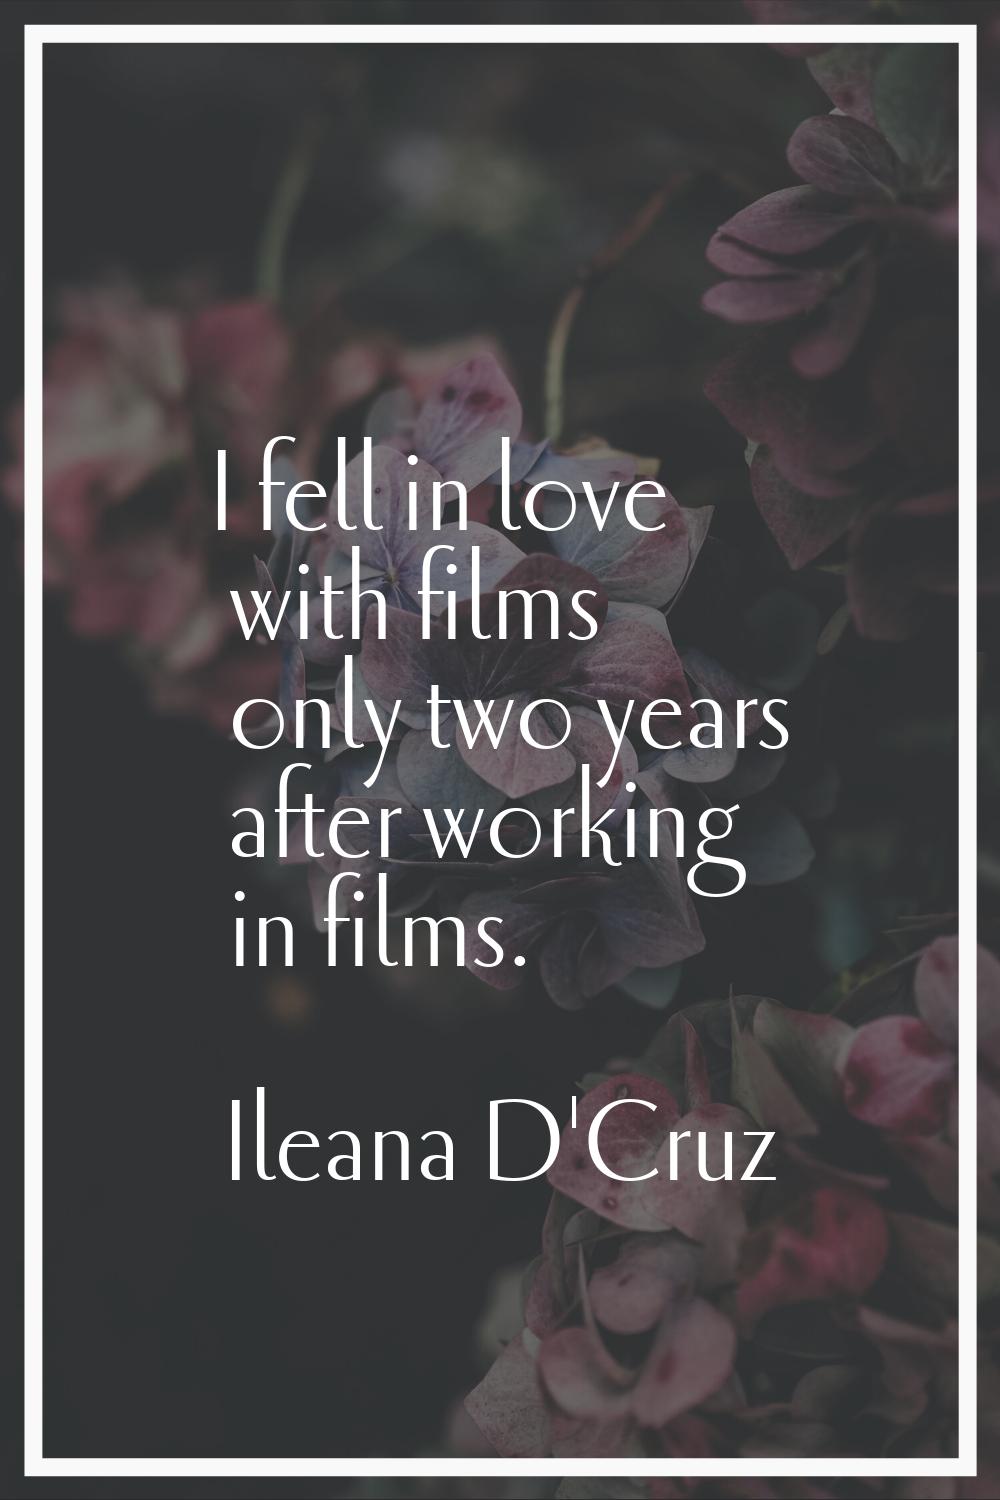 I fell in love with films only two years after working in films.